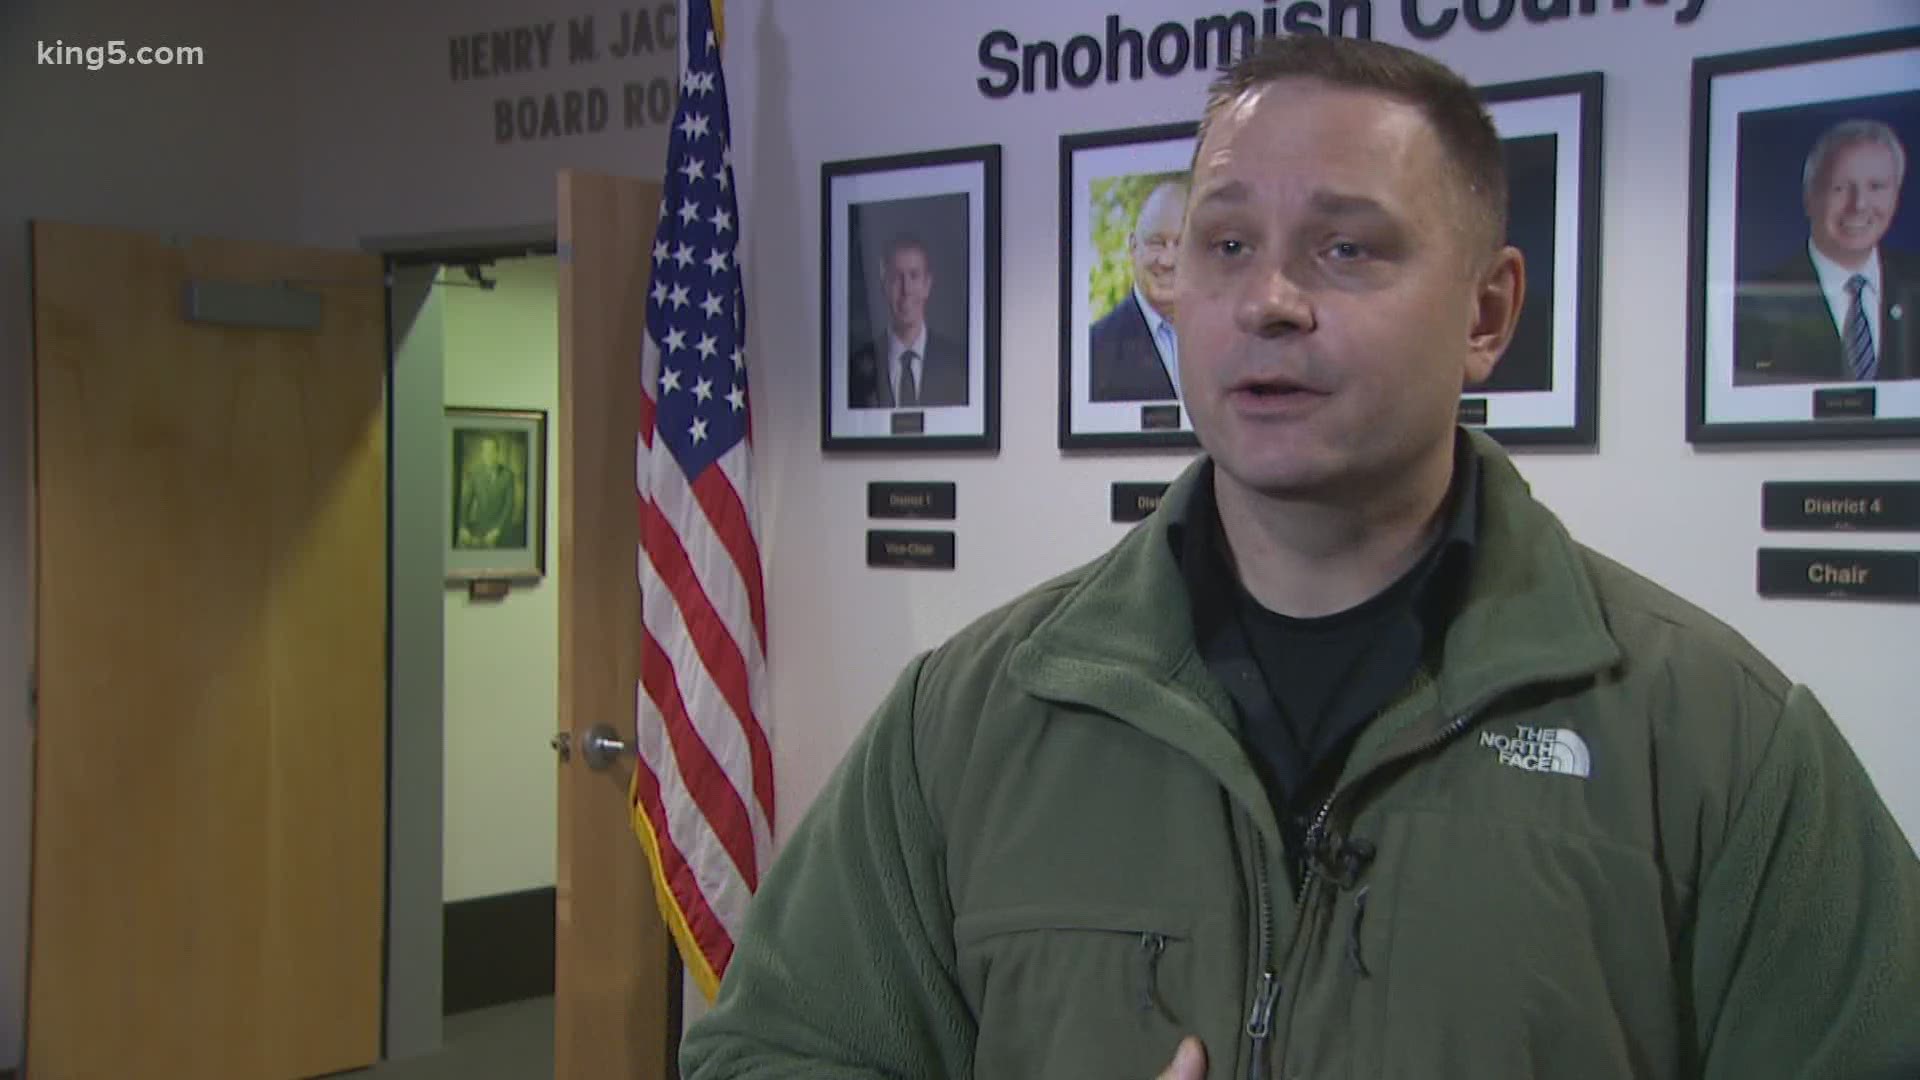 After Snohomish County Sheriff Adam Fortney posted that he would not enforce Washington state's stay home order, a resident started a petition for his recall.